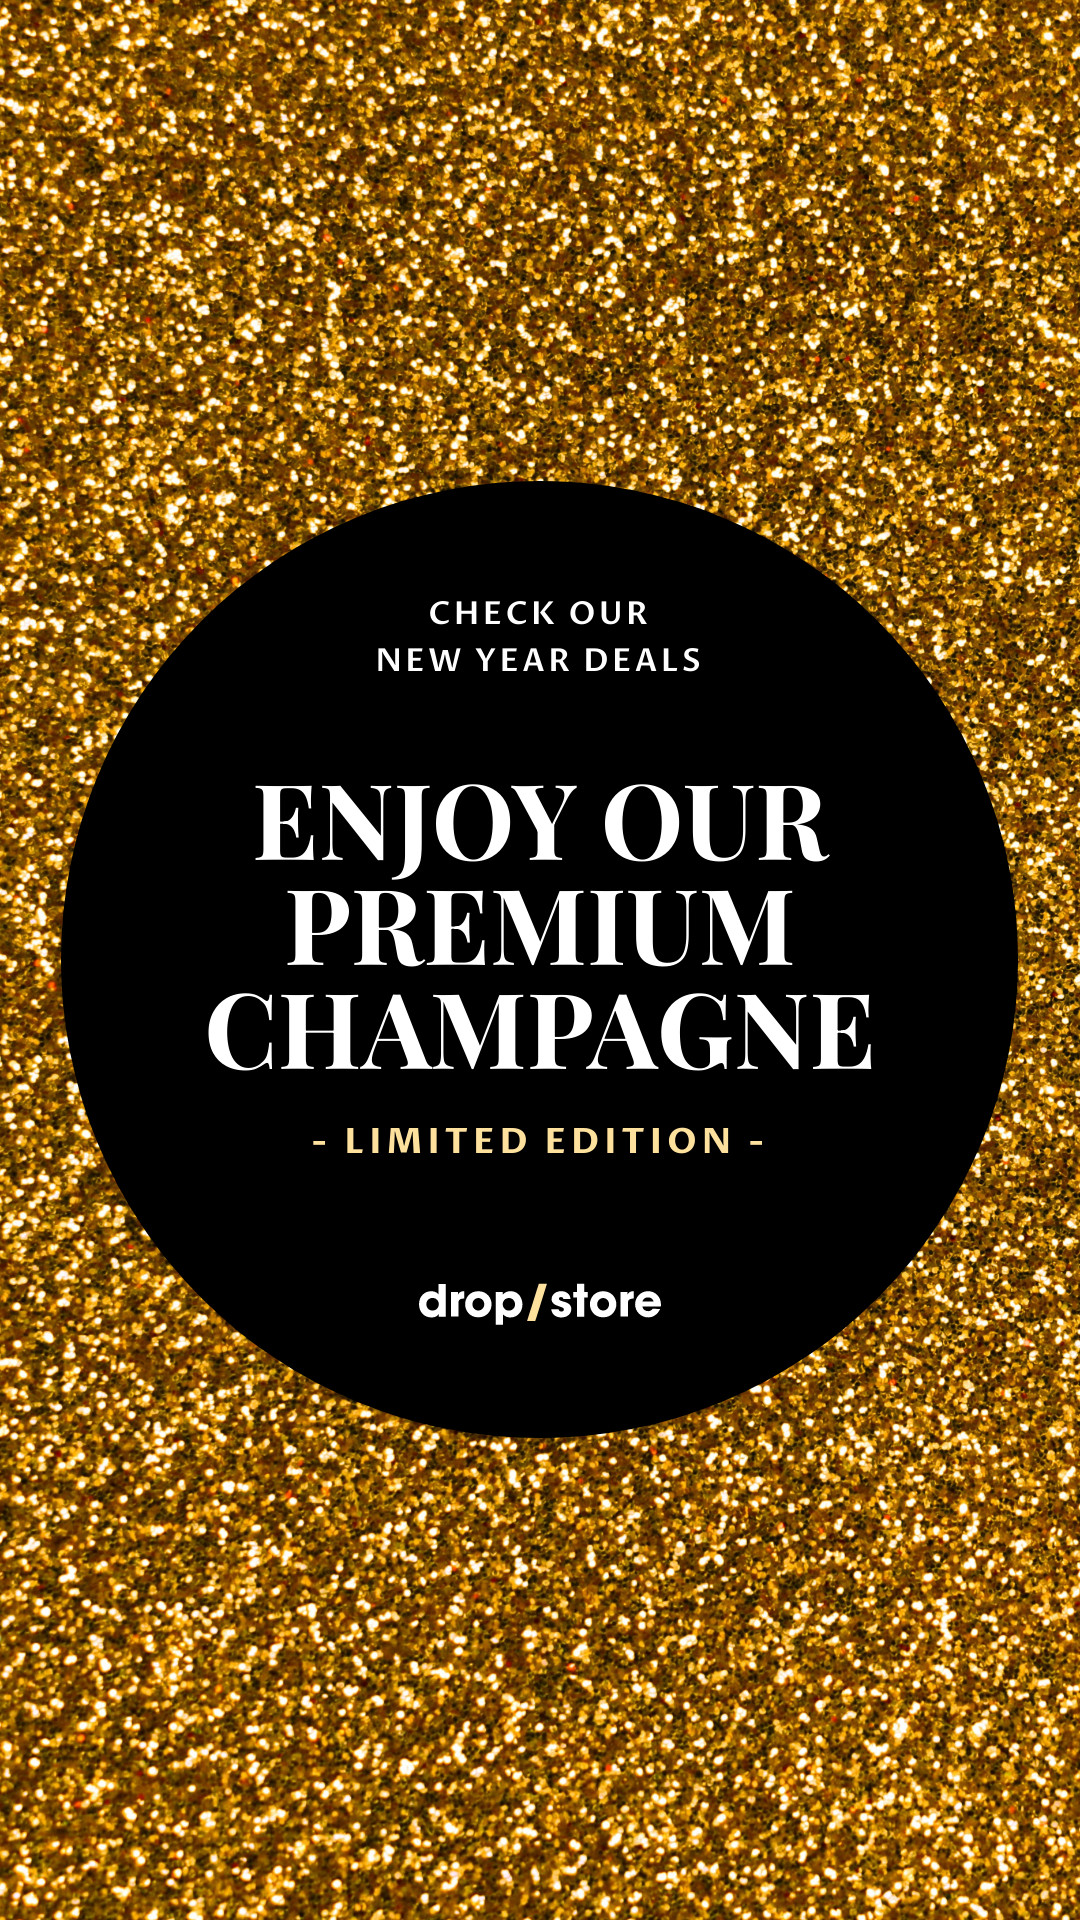 New Year Premium Champagne Deals Facebook Cover 820x360